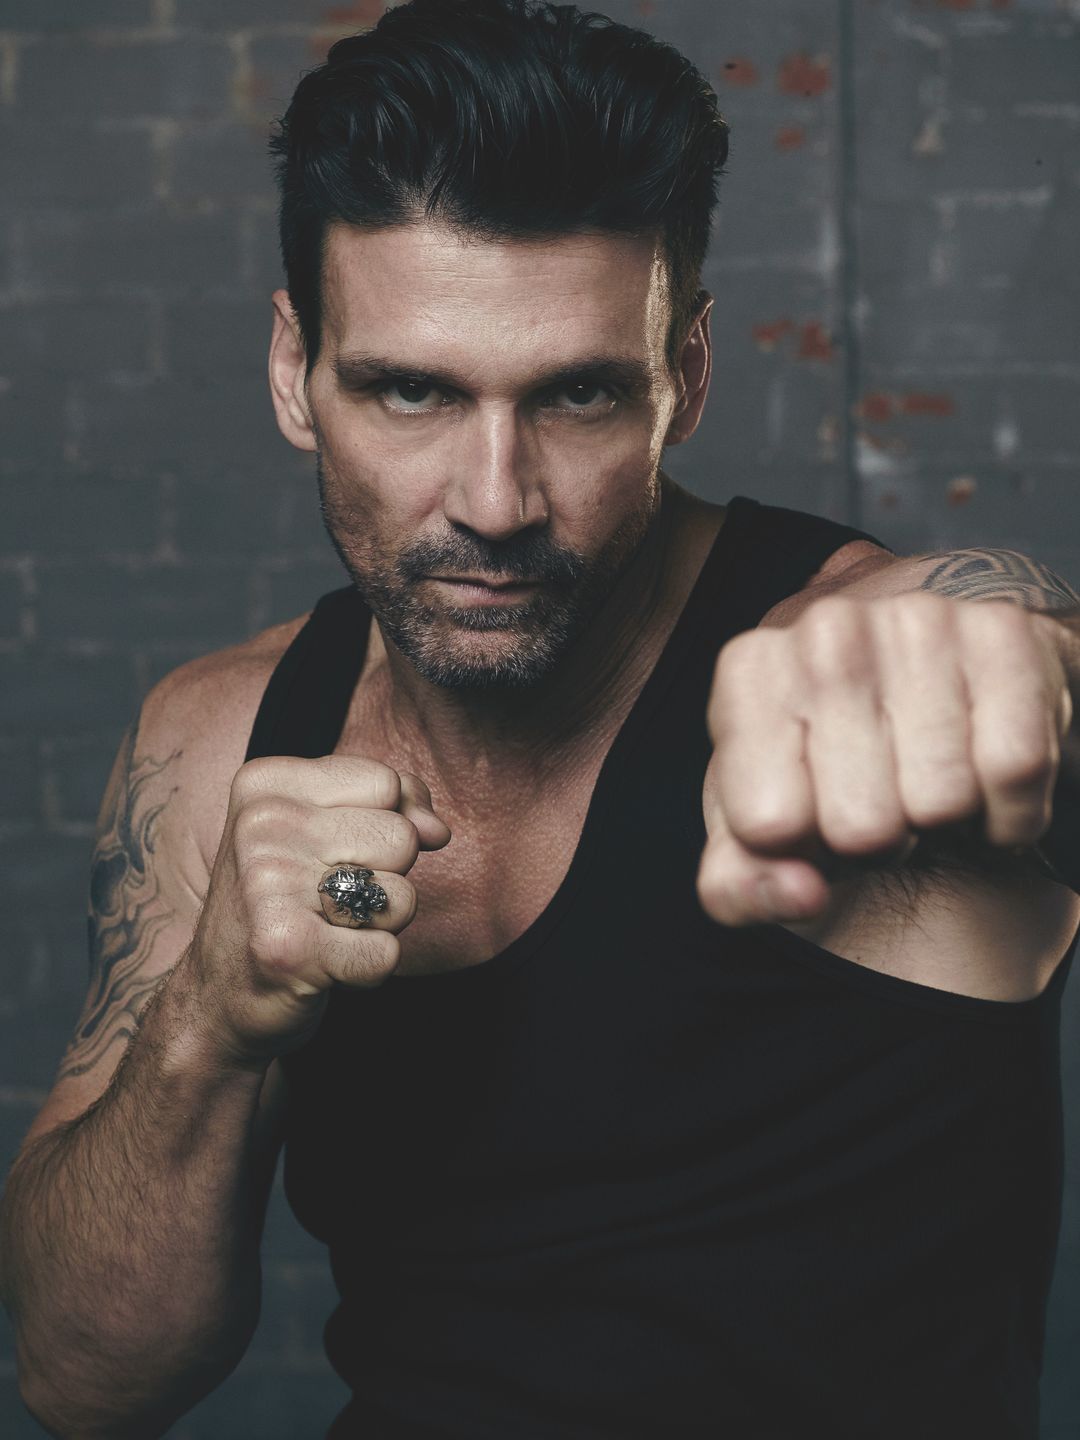 Frank Grillo early life